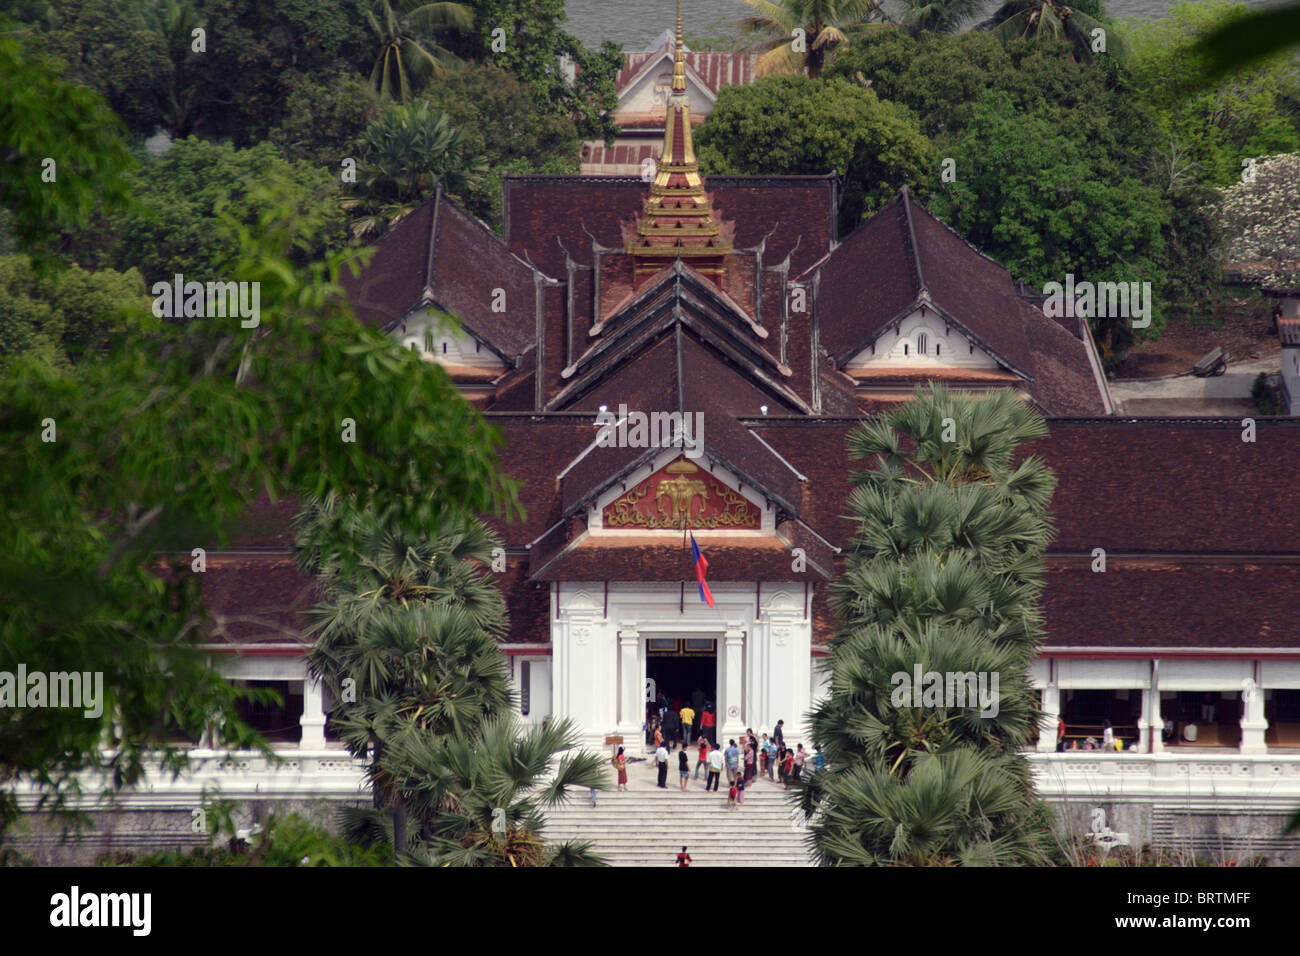 The Royal Palace Museum is seen from above being visited by tourists in Luang Prabang, Laos. Stock Photo